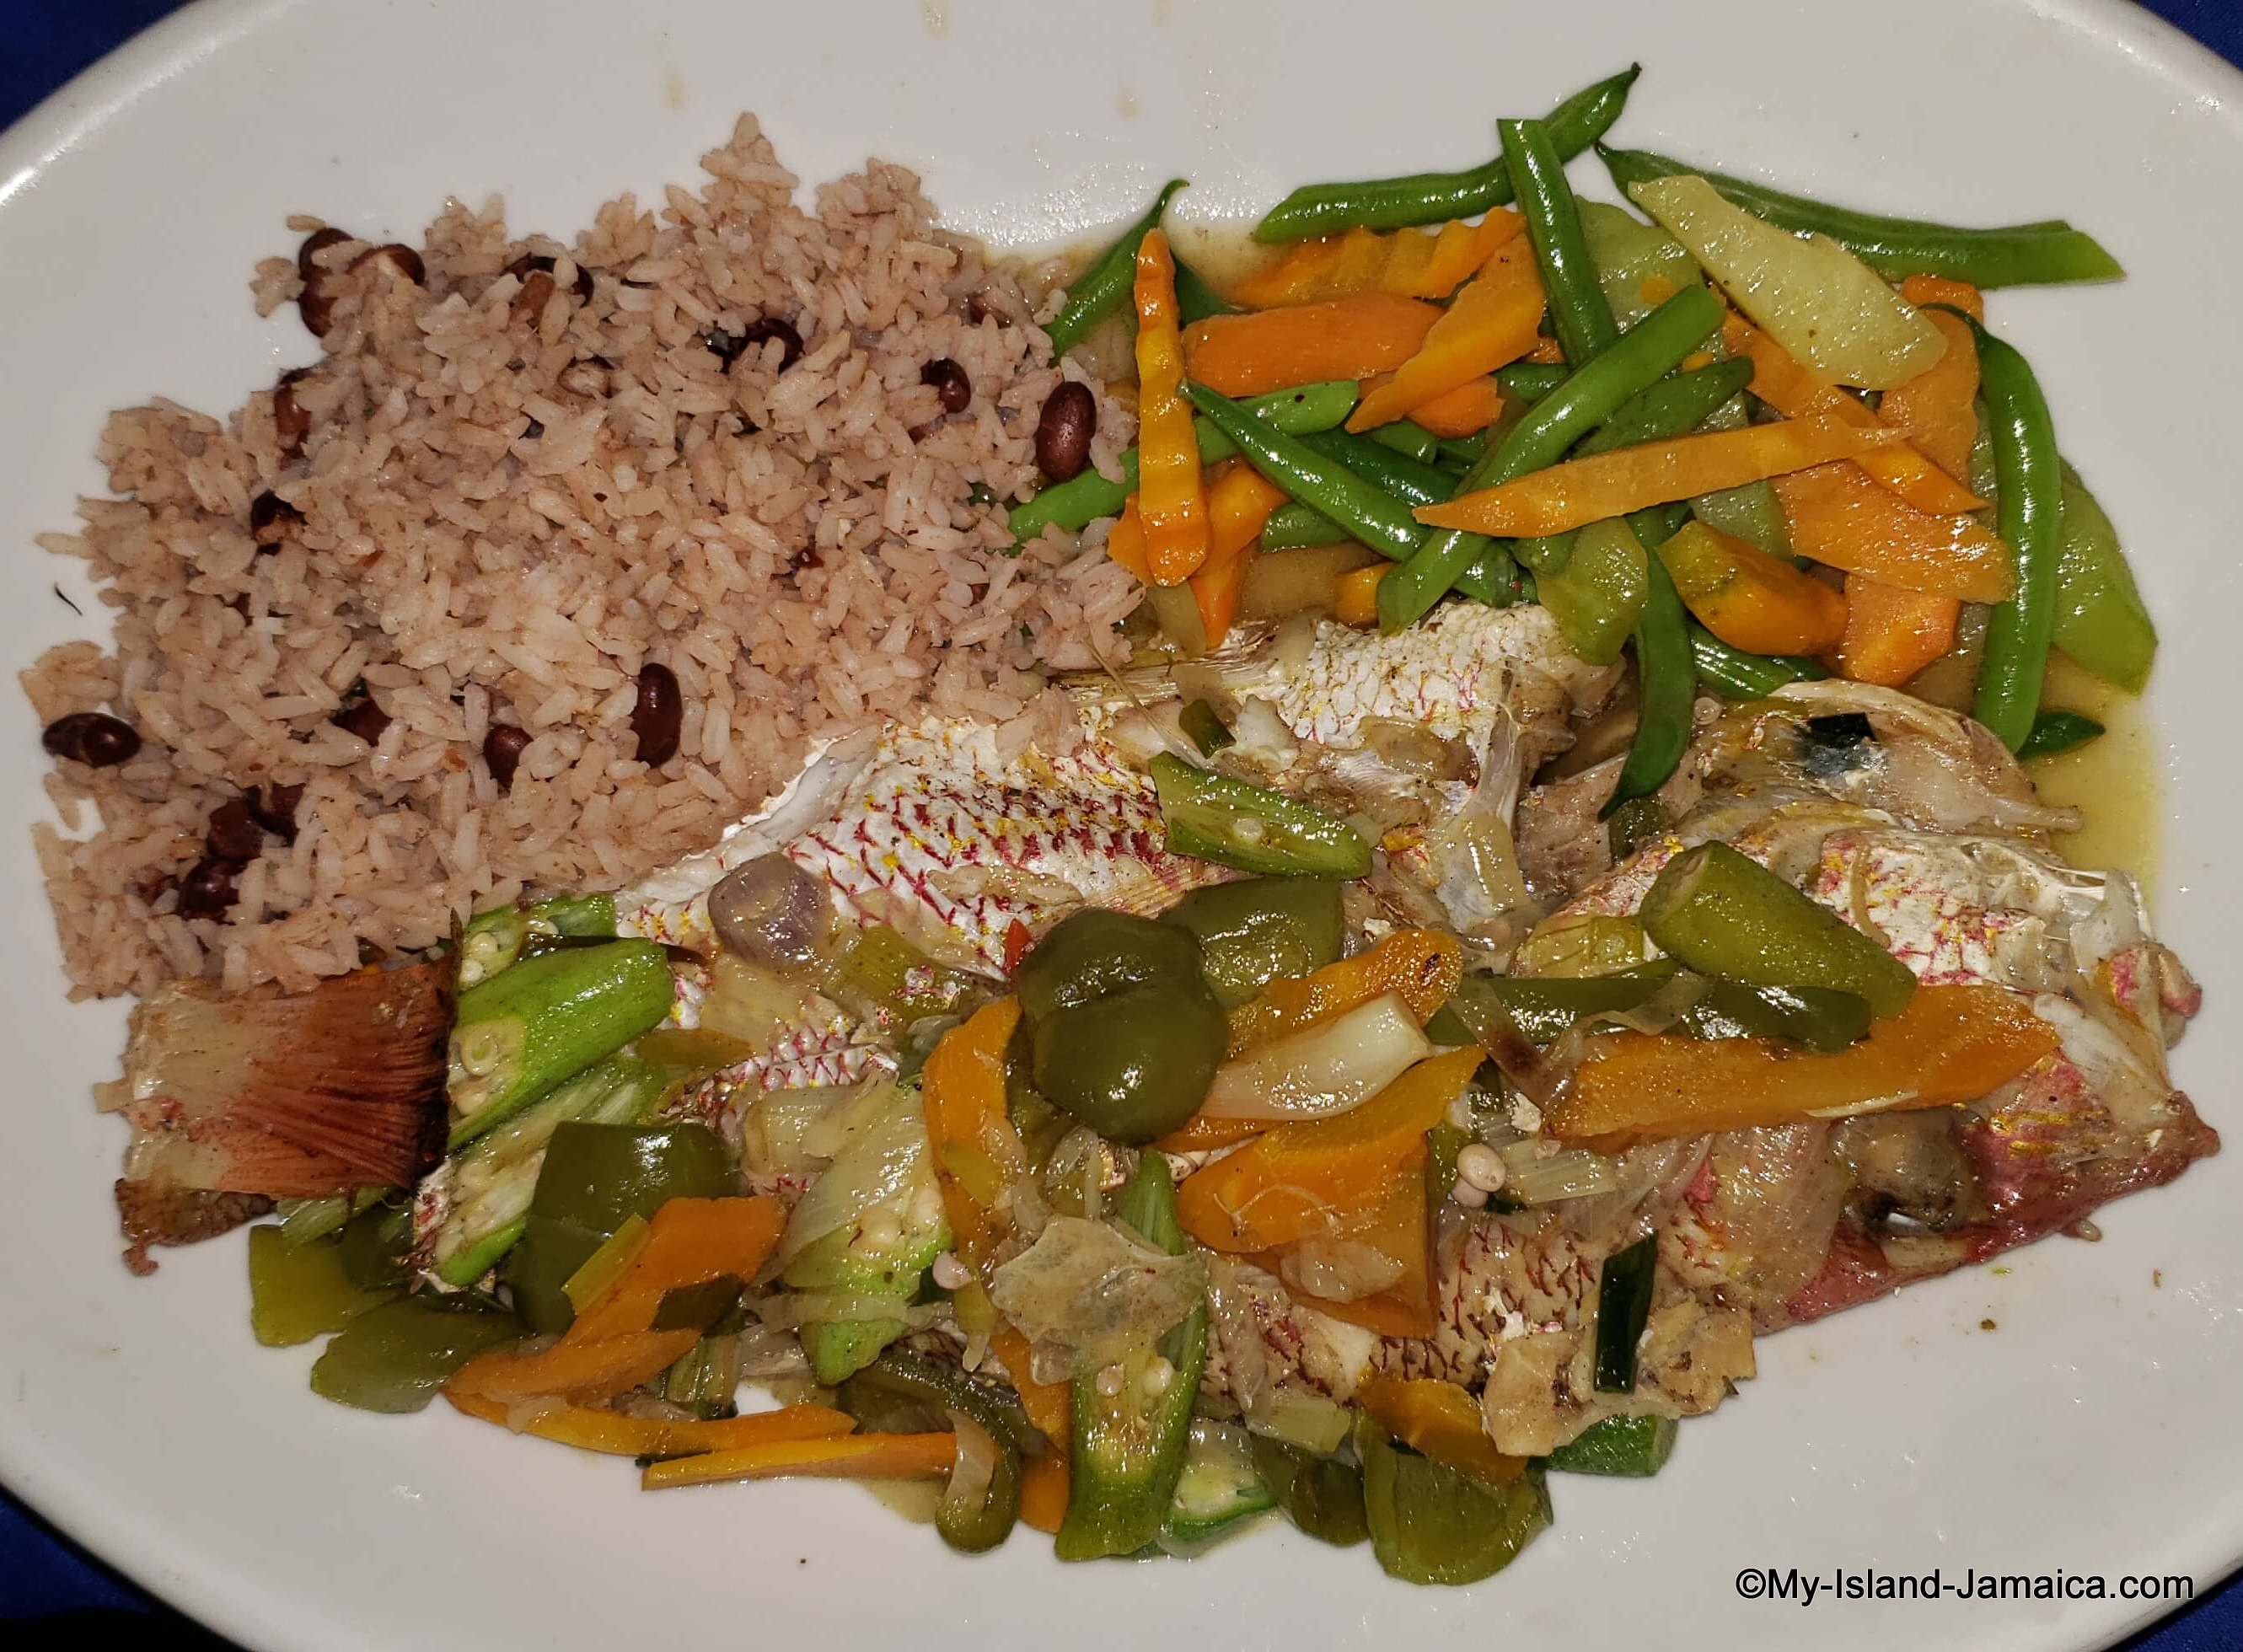 Pictures of Jamaican food - Lip Smacking, Delectable Food From Jamaica